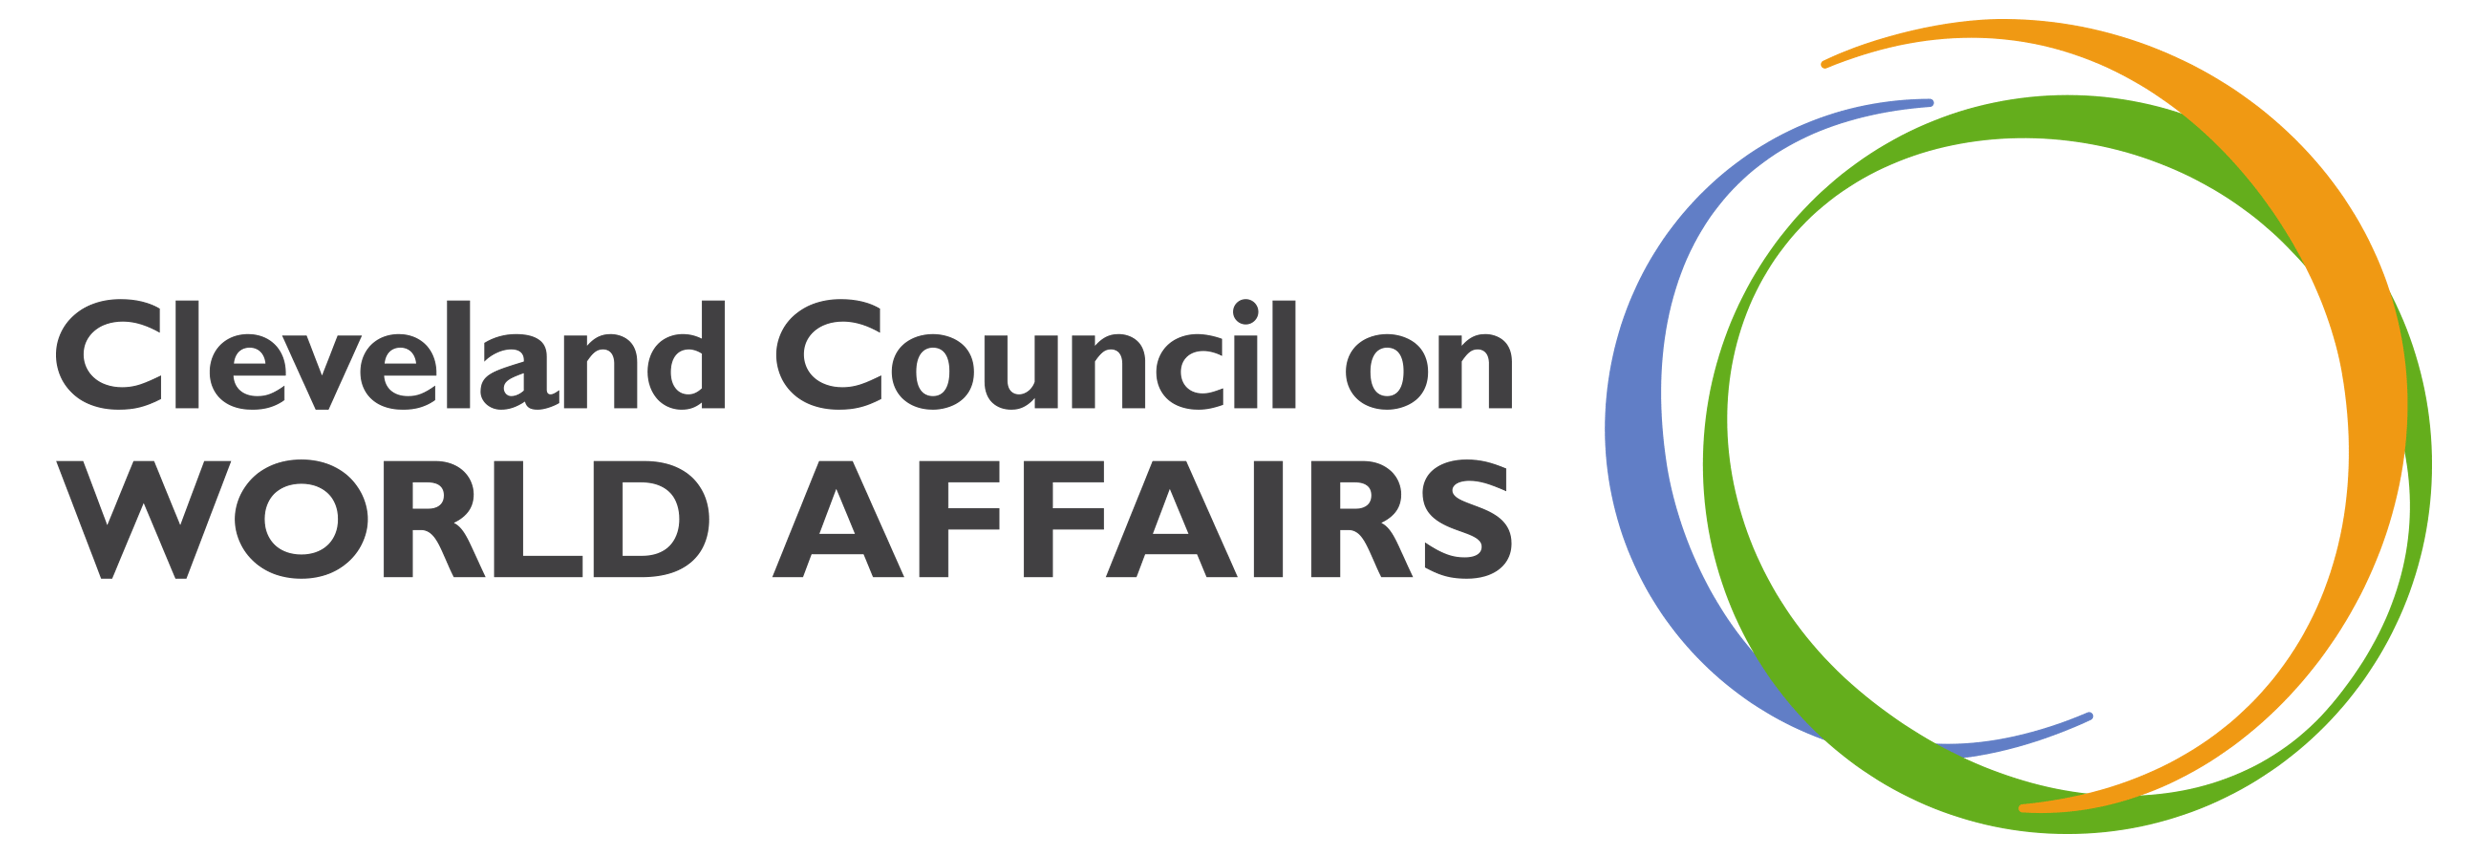 Cleveland Council on World Affairs